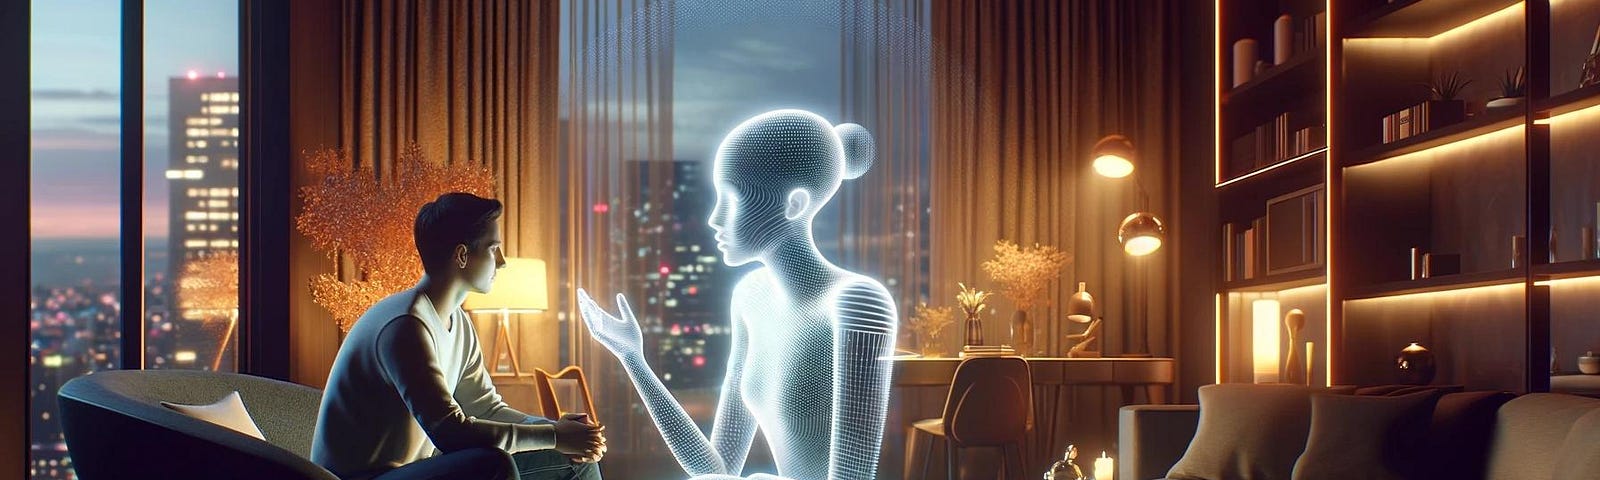 A_futuristic_scene_inspired_by_the_movie_’Her,’